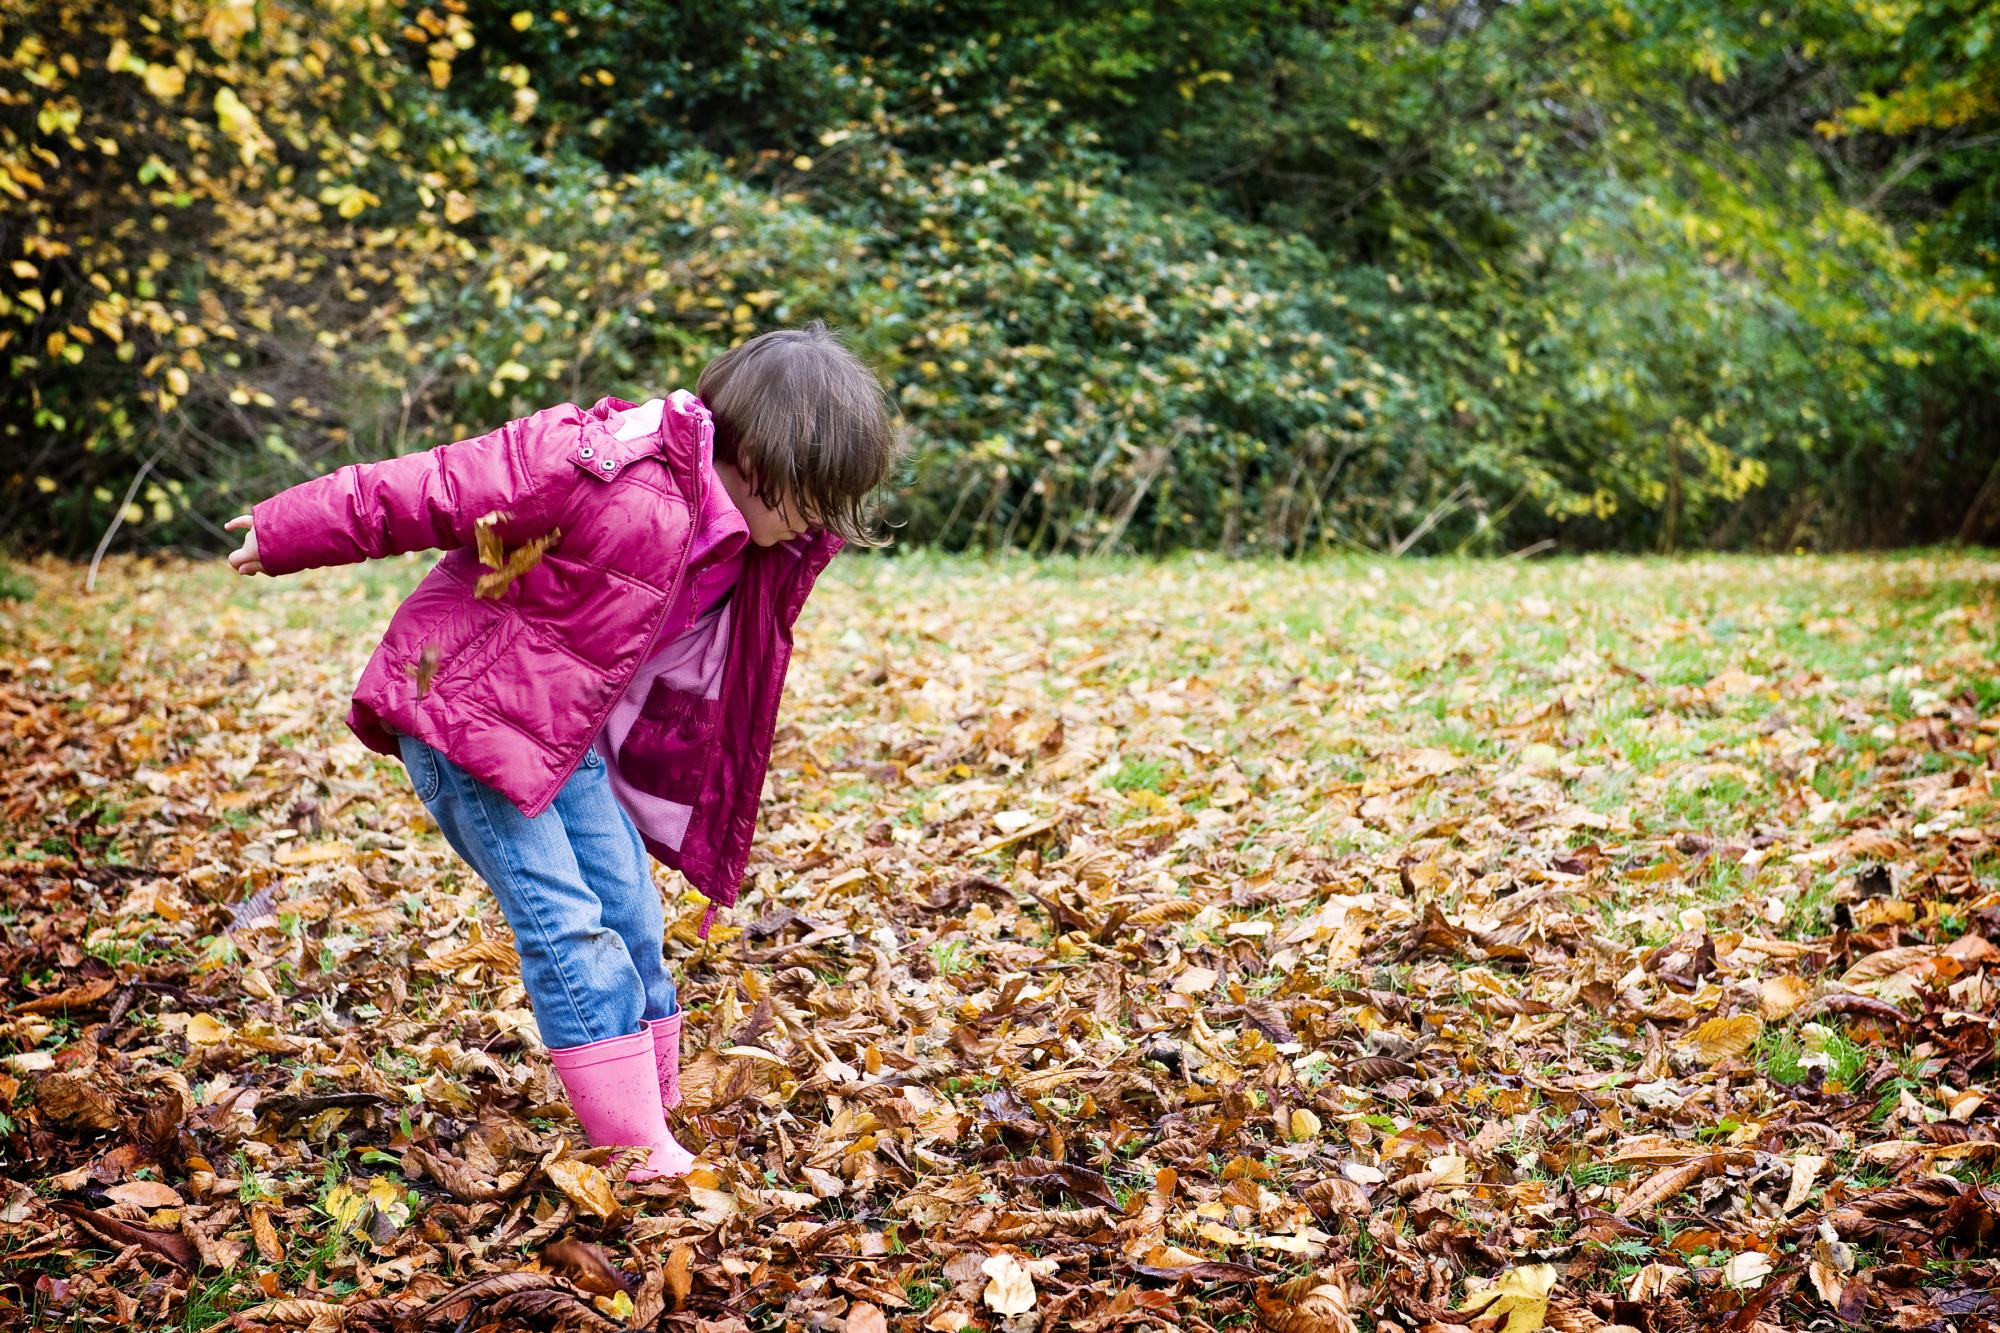 Young girl jumping into pile of autumn leaves. ©beckyduncanphotographyltd/SNH. For information on reproduction rights contact the Scottish Natural Heritage Image Library on Tel. 01738 444177 or www.nature.scot